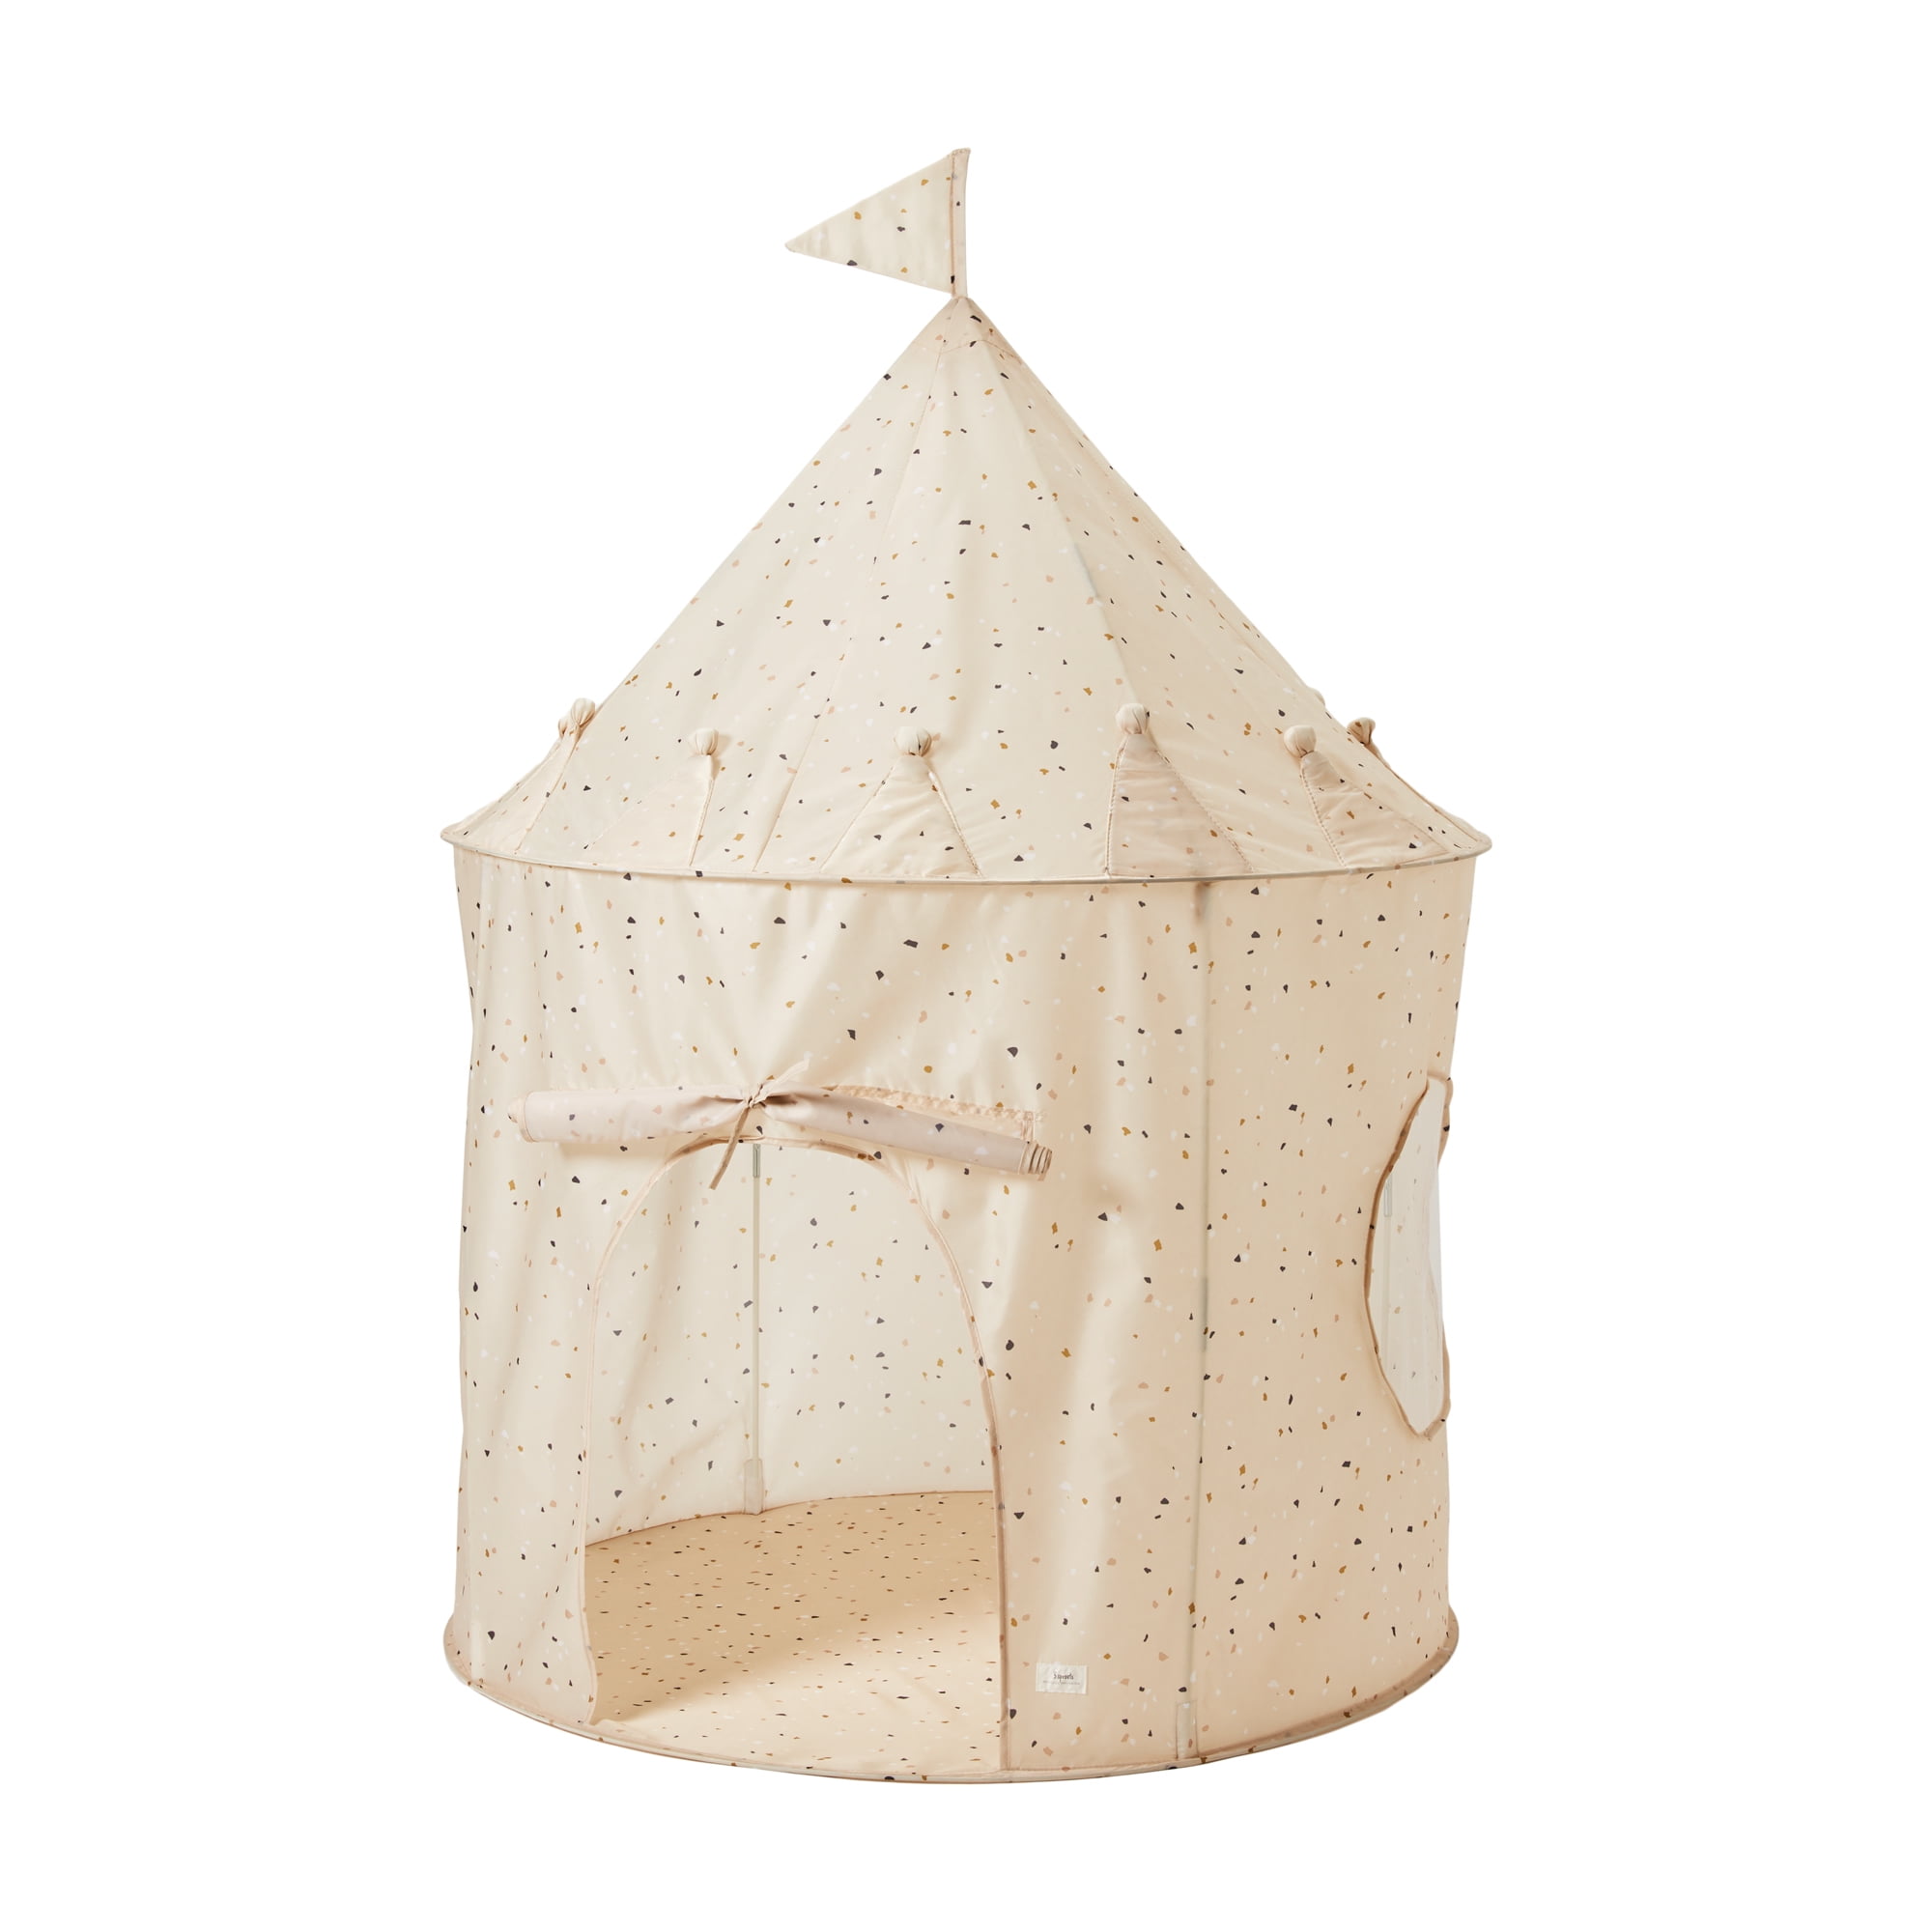 3 Sprouts Kids Play Tent Playhouse Castle with Recycled Fabric for Indoor  and Outdoor Games in Terrazzo Beige 